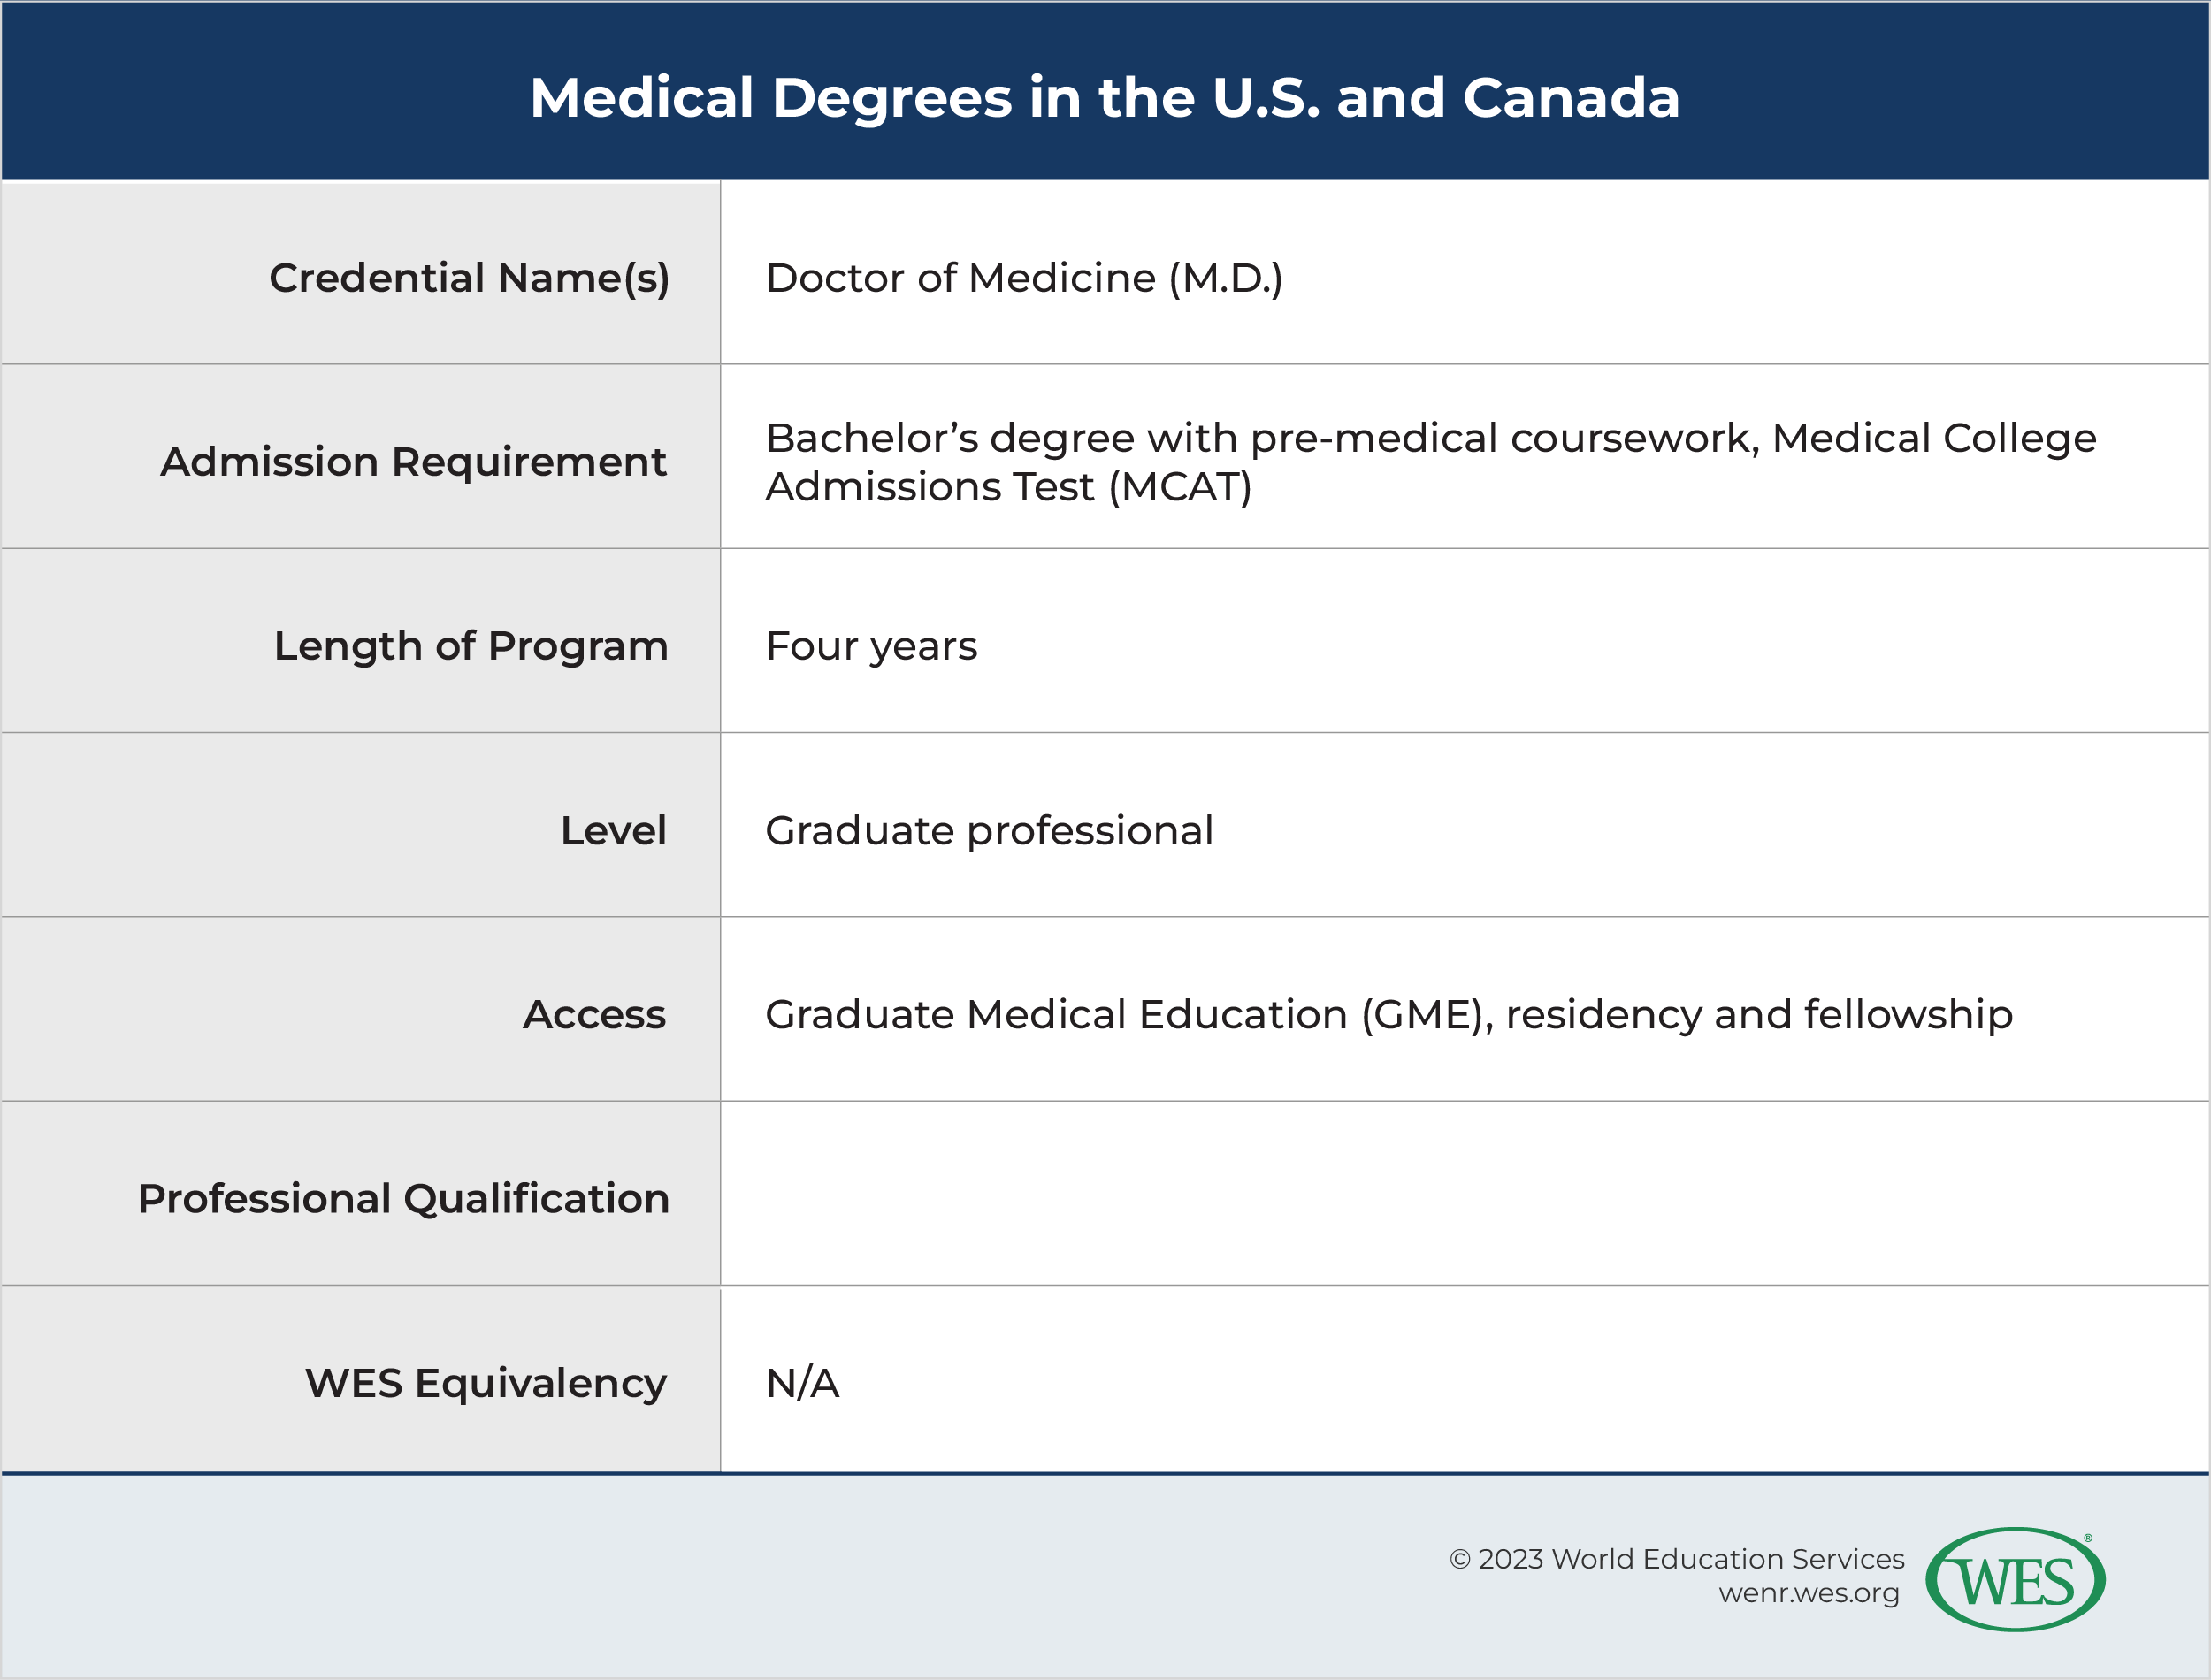 A table outlining key details of standard Doctor of Medicine (M.D.) degree programs in the U.S. and Canada. 